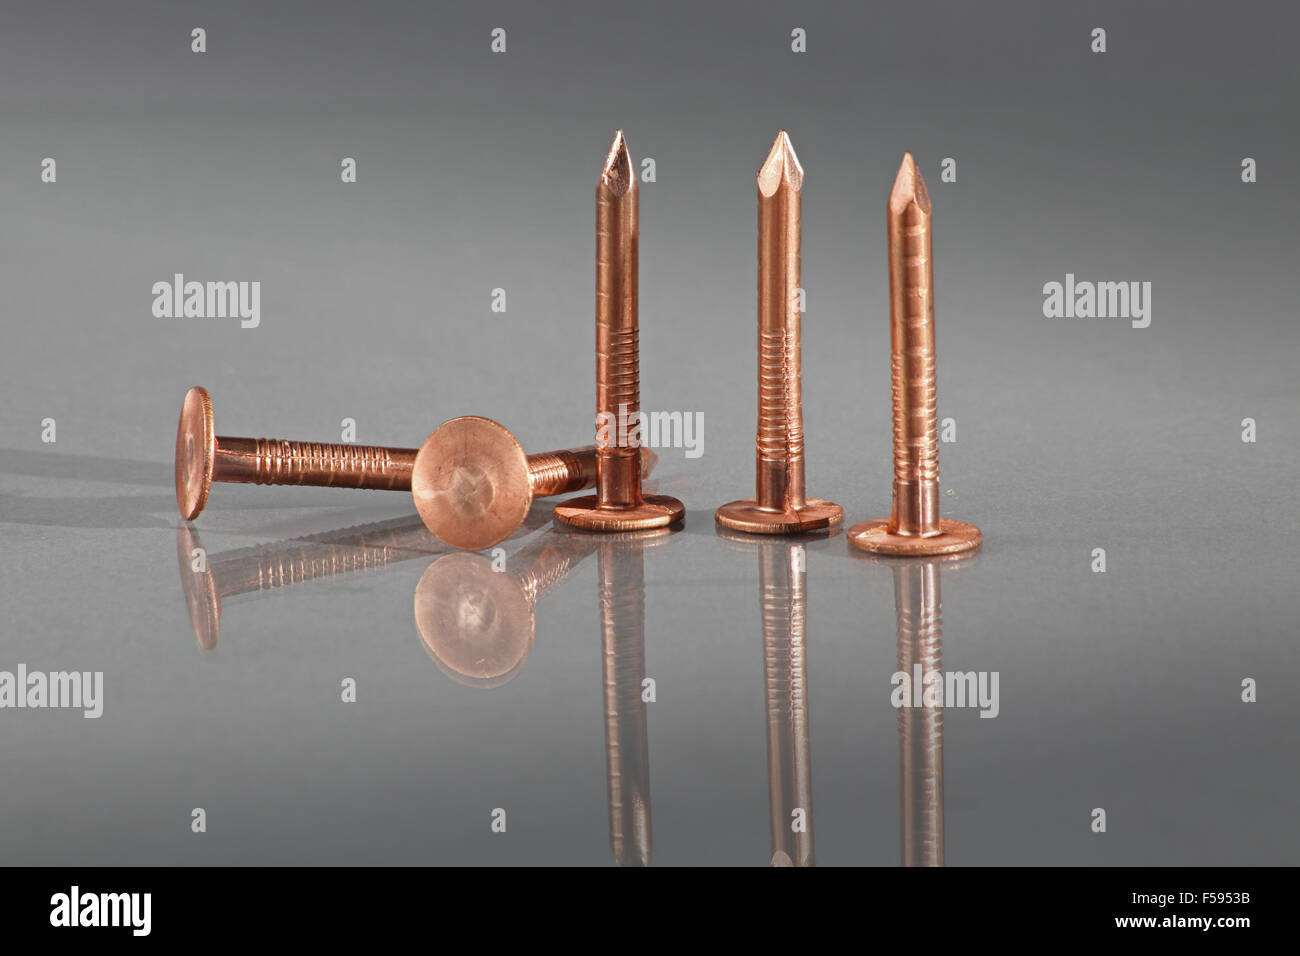 Copper roofing nails shown on a plain reflective background. Copper nails are used for slate roofing and in maritime conditions Stock Photo